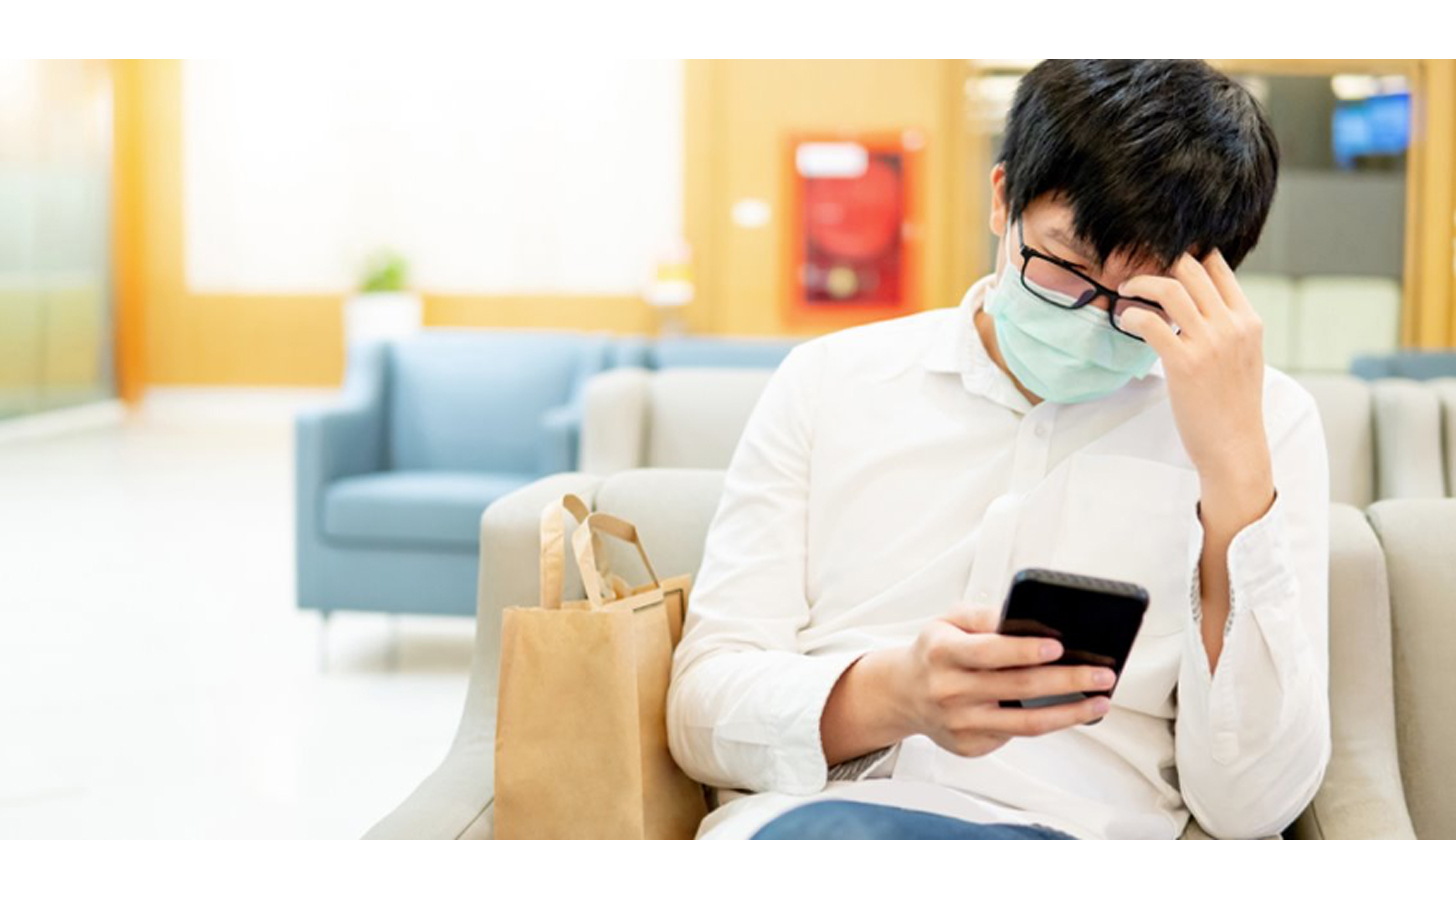 A young asian man sits in the waiting room wearing a mask while looking at his smartphone.